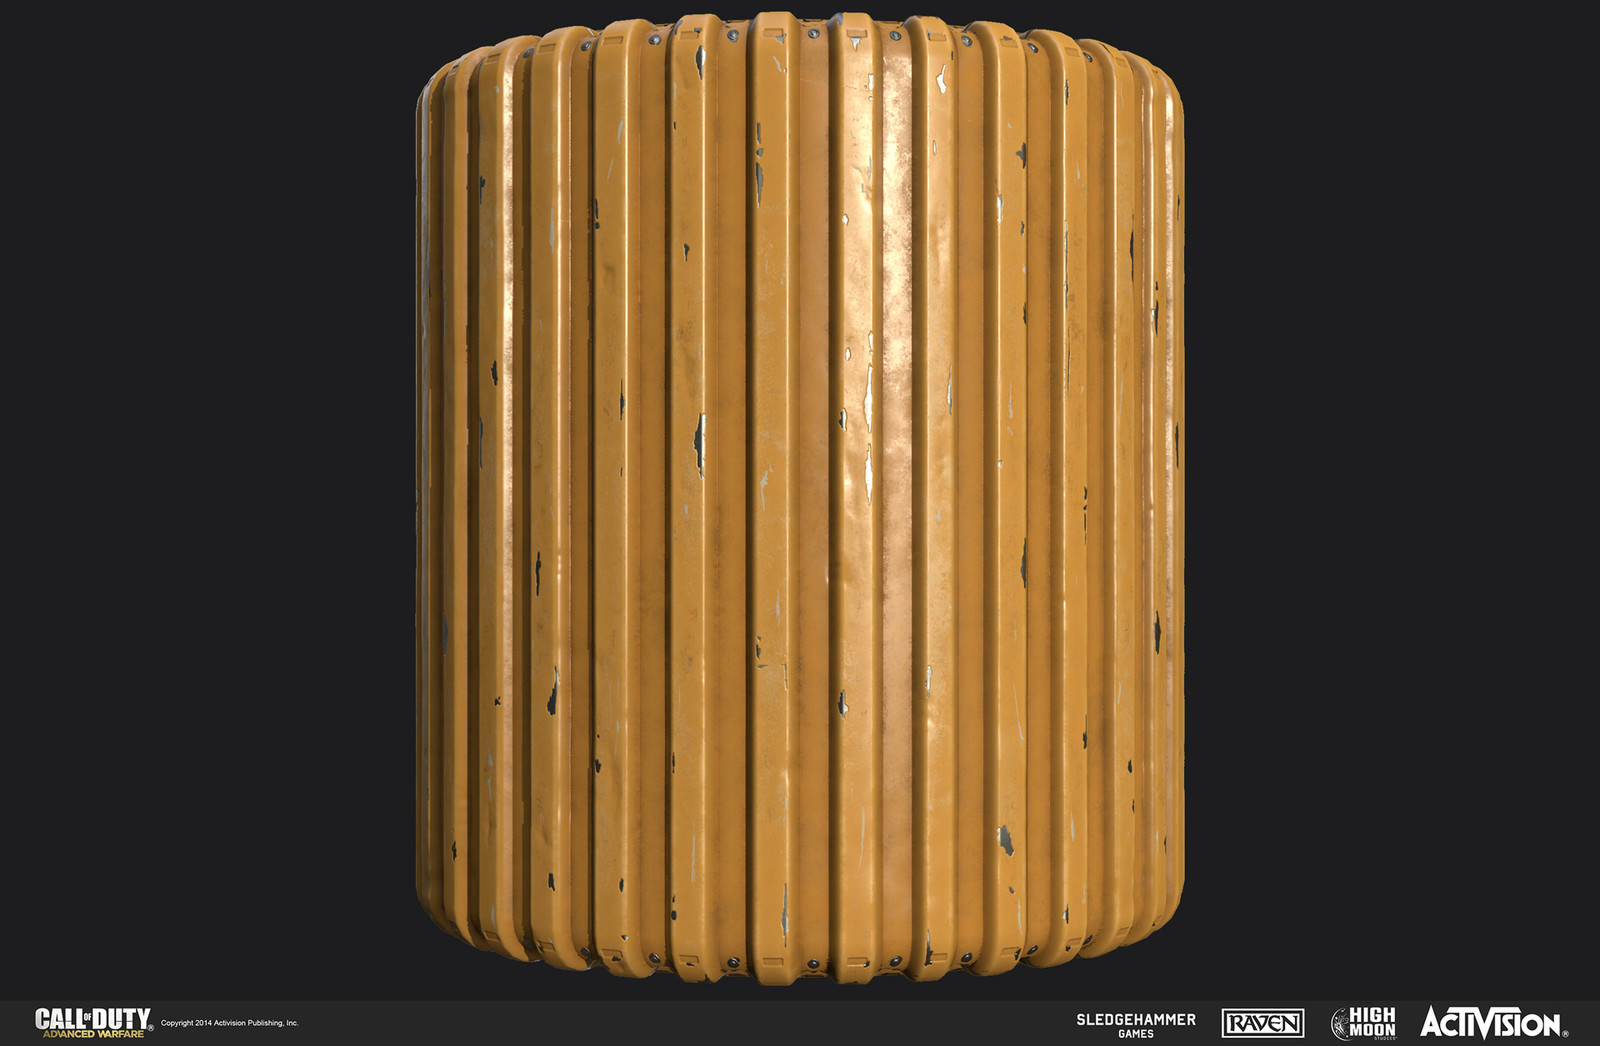 Corrugated painted metal material for "Chopshop" multiplayer map. Created with nDo and Photoshop.